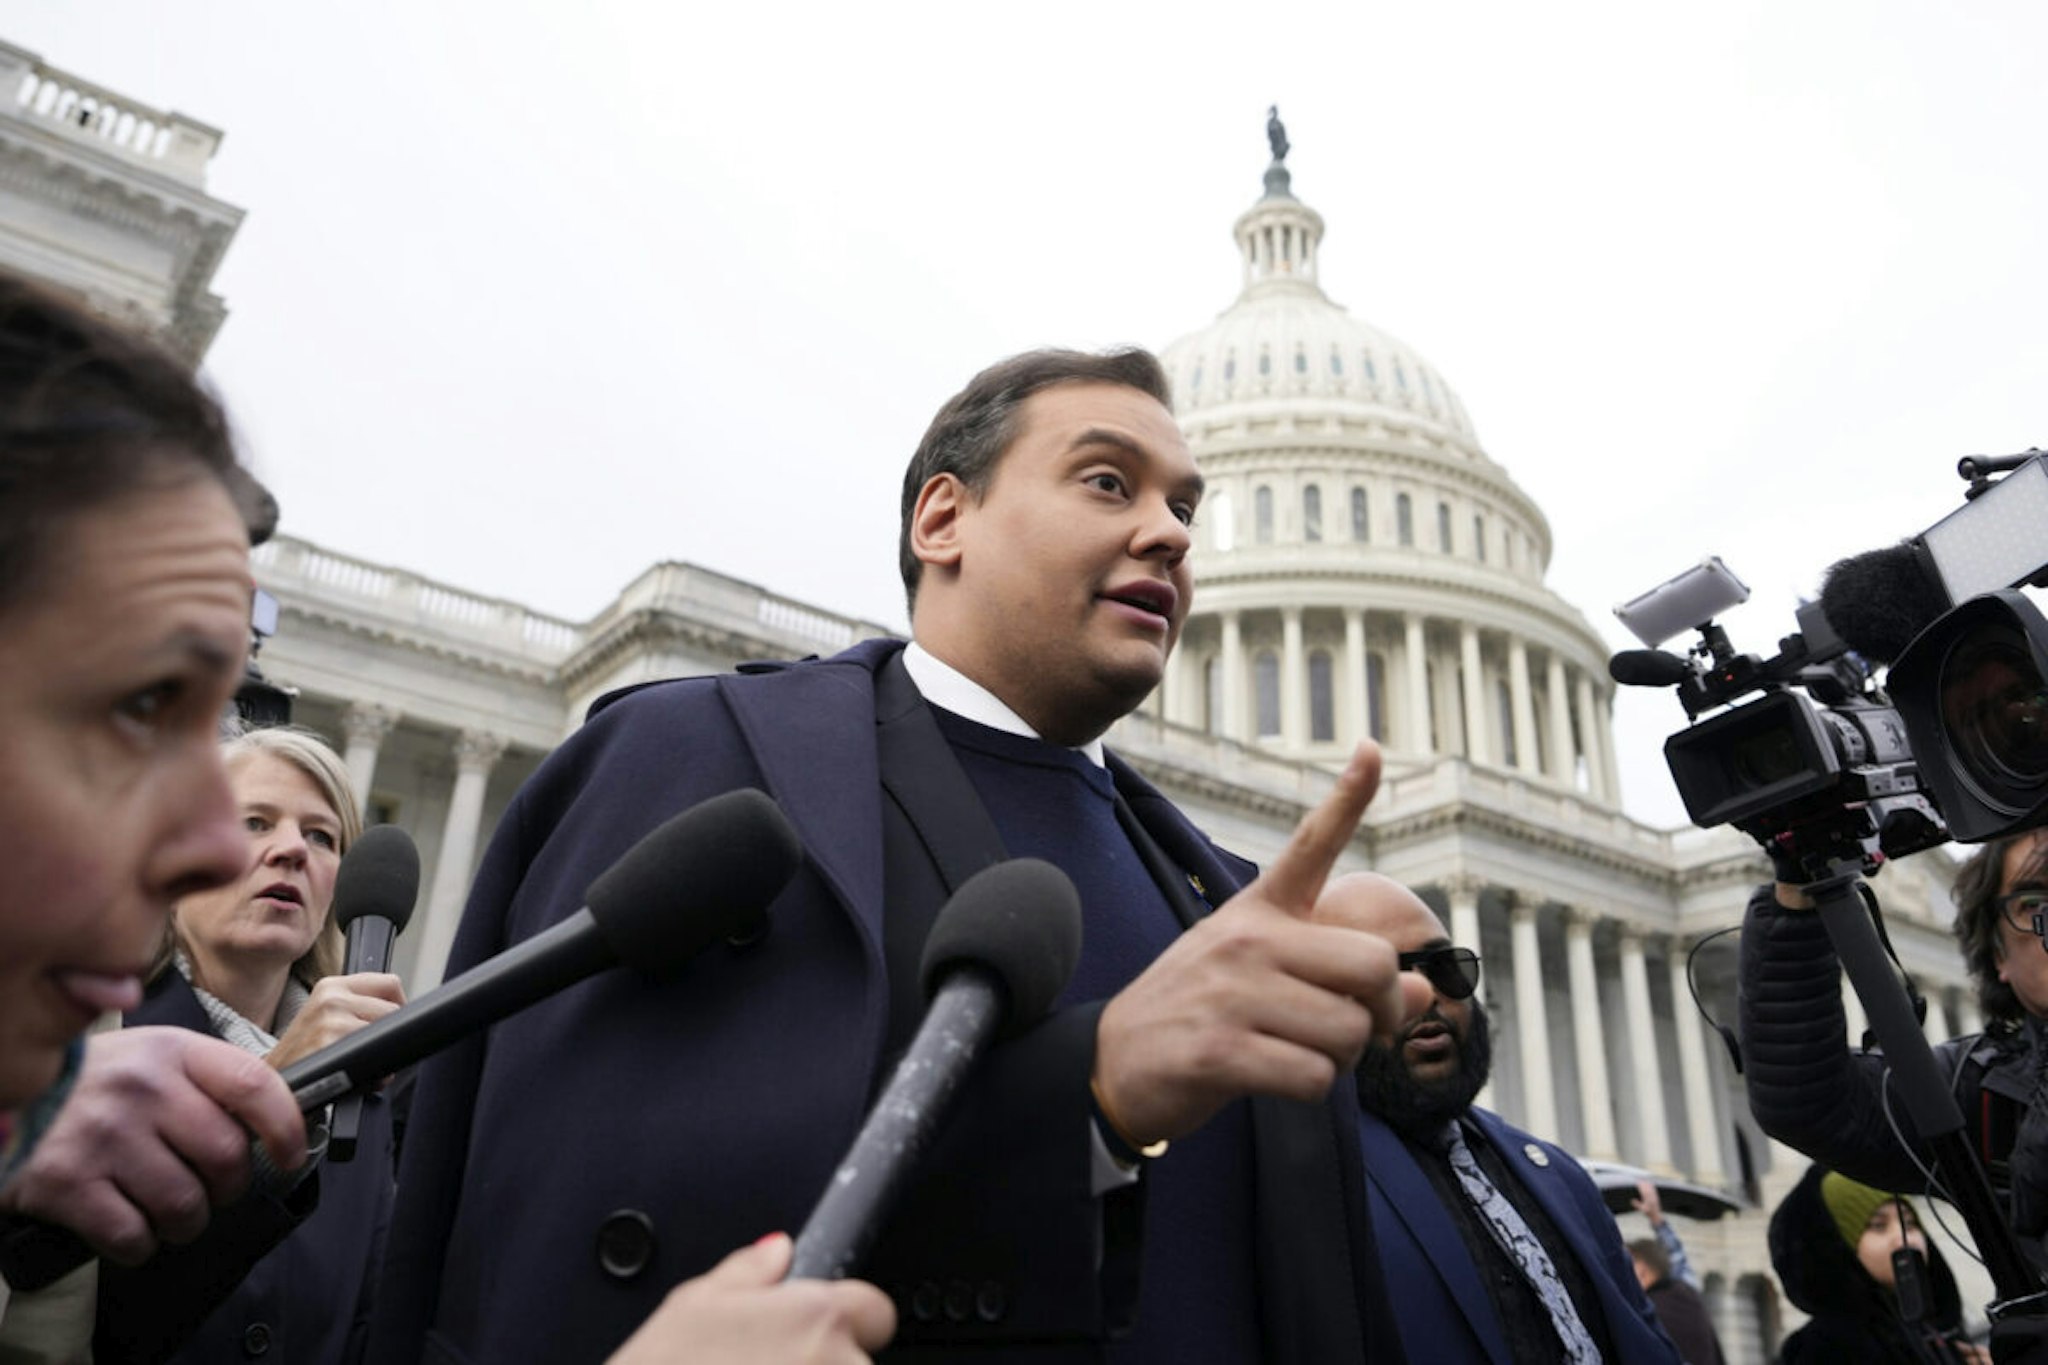 WASHINGTON, DC - DECEMBER 01: Rep. George Santos (R-NY) is surrounded by journalists as he leaves the U.S. Capitol after his fellow members of Congress voted to expel him from the House of Representatives on December 01, 2023 in Washington, DC. Charged by the U.S. Department of Justice with 23 felonies in New York including fraud and campaign finance violations, Santos, 35, was expelled from the House of Representatives by a vote of 311-114. Santos is only the sixth person in U.S. history to be expelled from the House of Representatives.